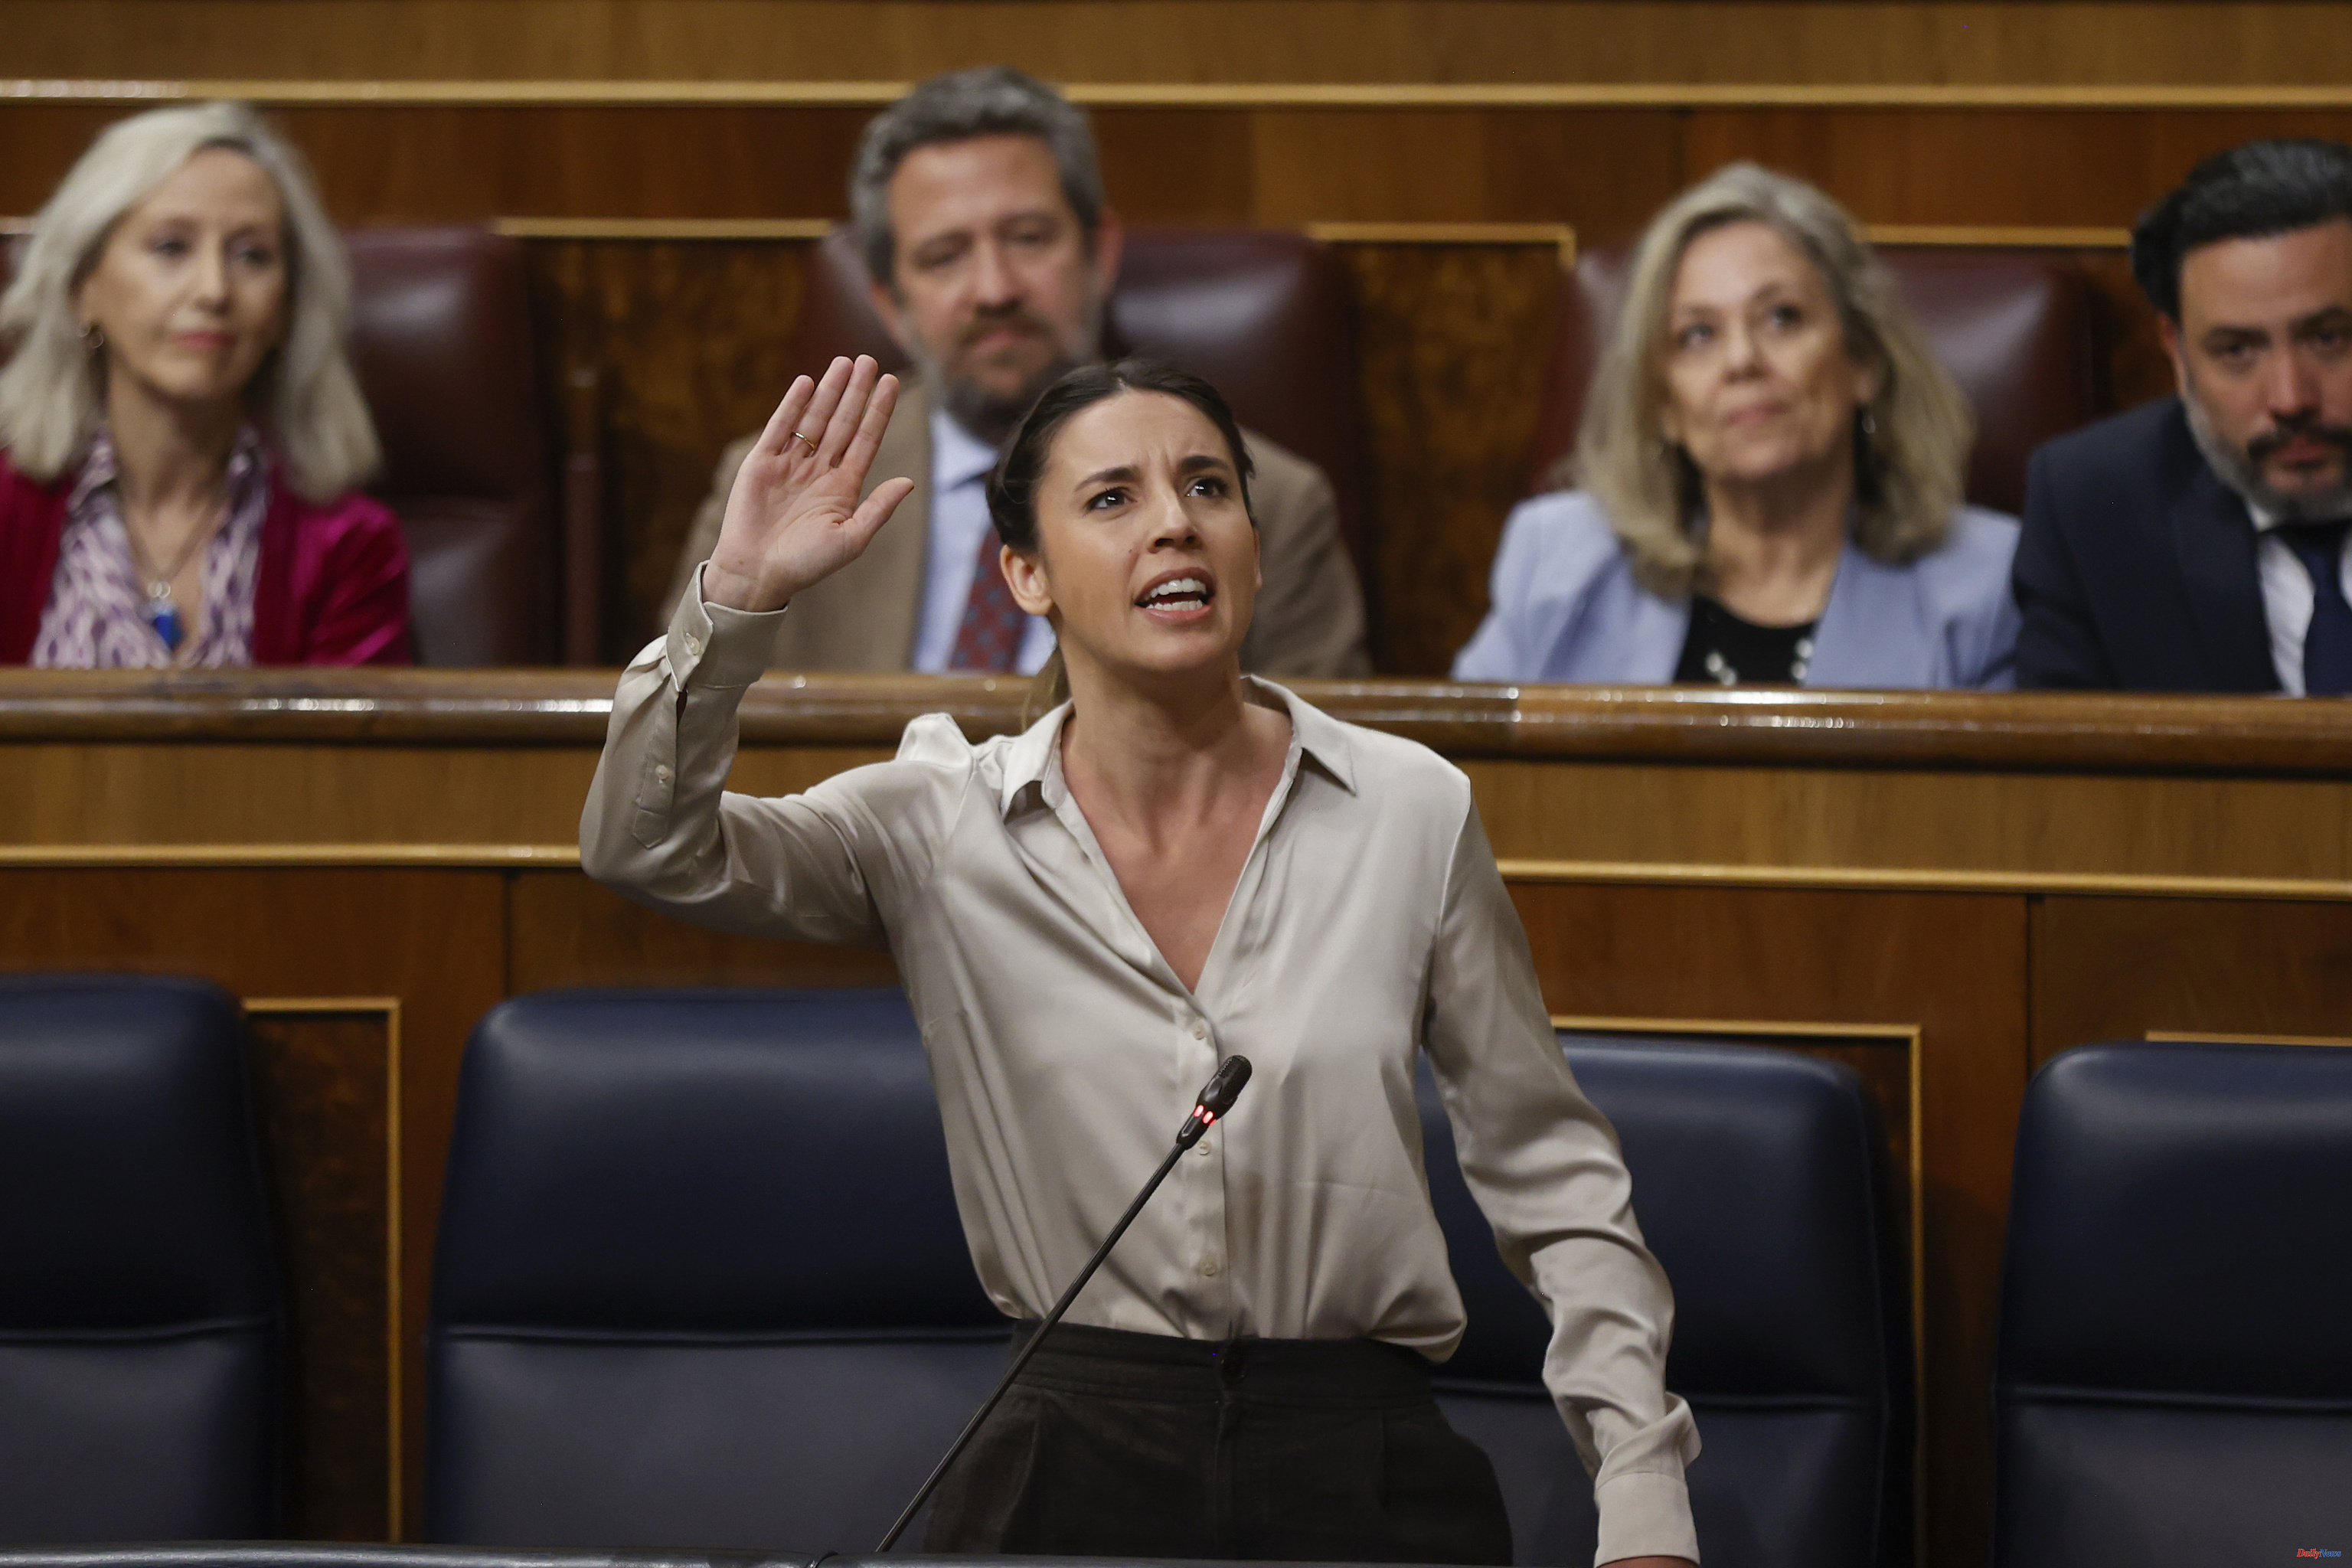 Politics Irene Montero warns Yolanda Díaz that Errejón was also "told that he was going to have a very good electoral result"